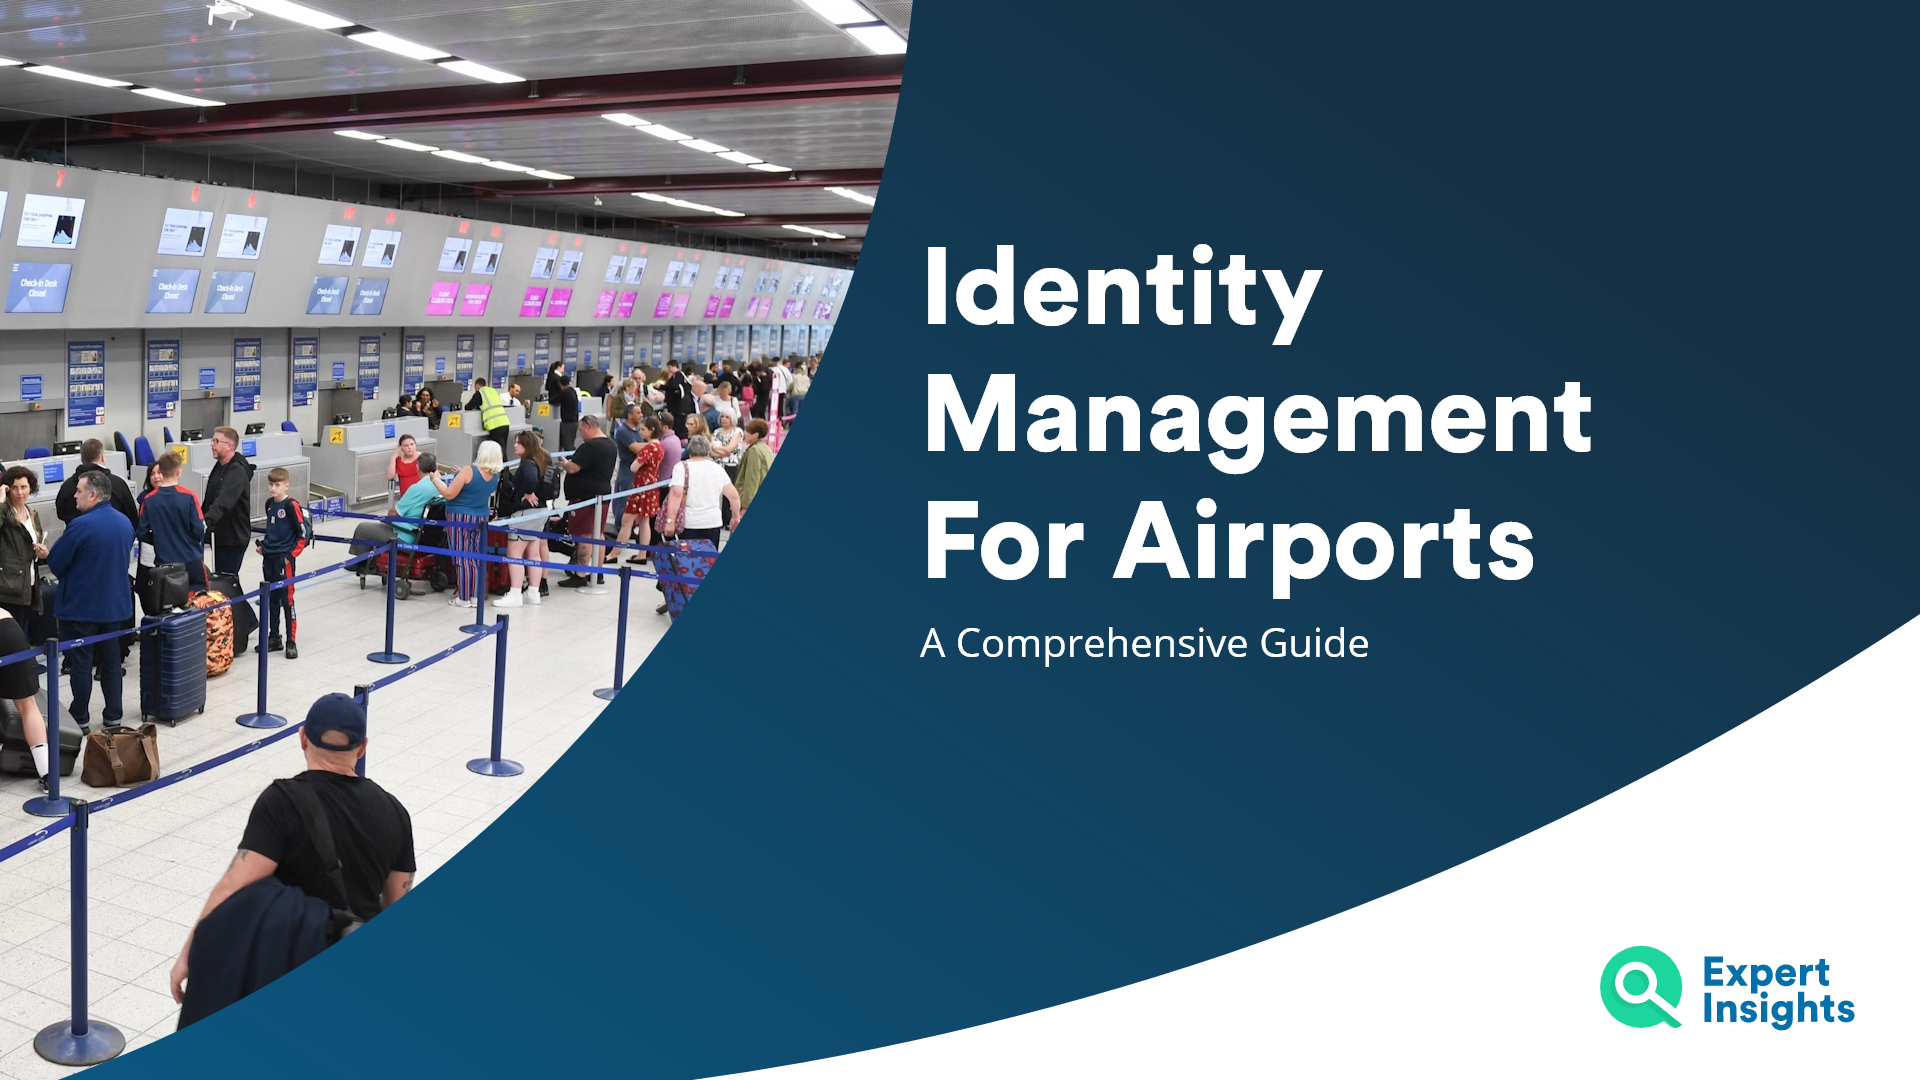 Identity Management For Airports: A Comprehensive Guide - Expert Insights